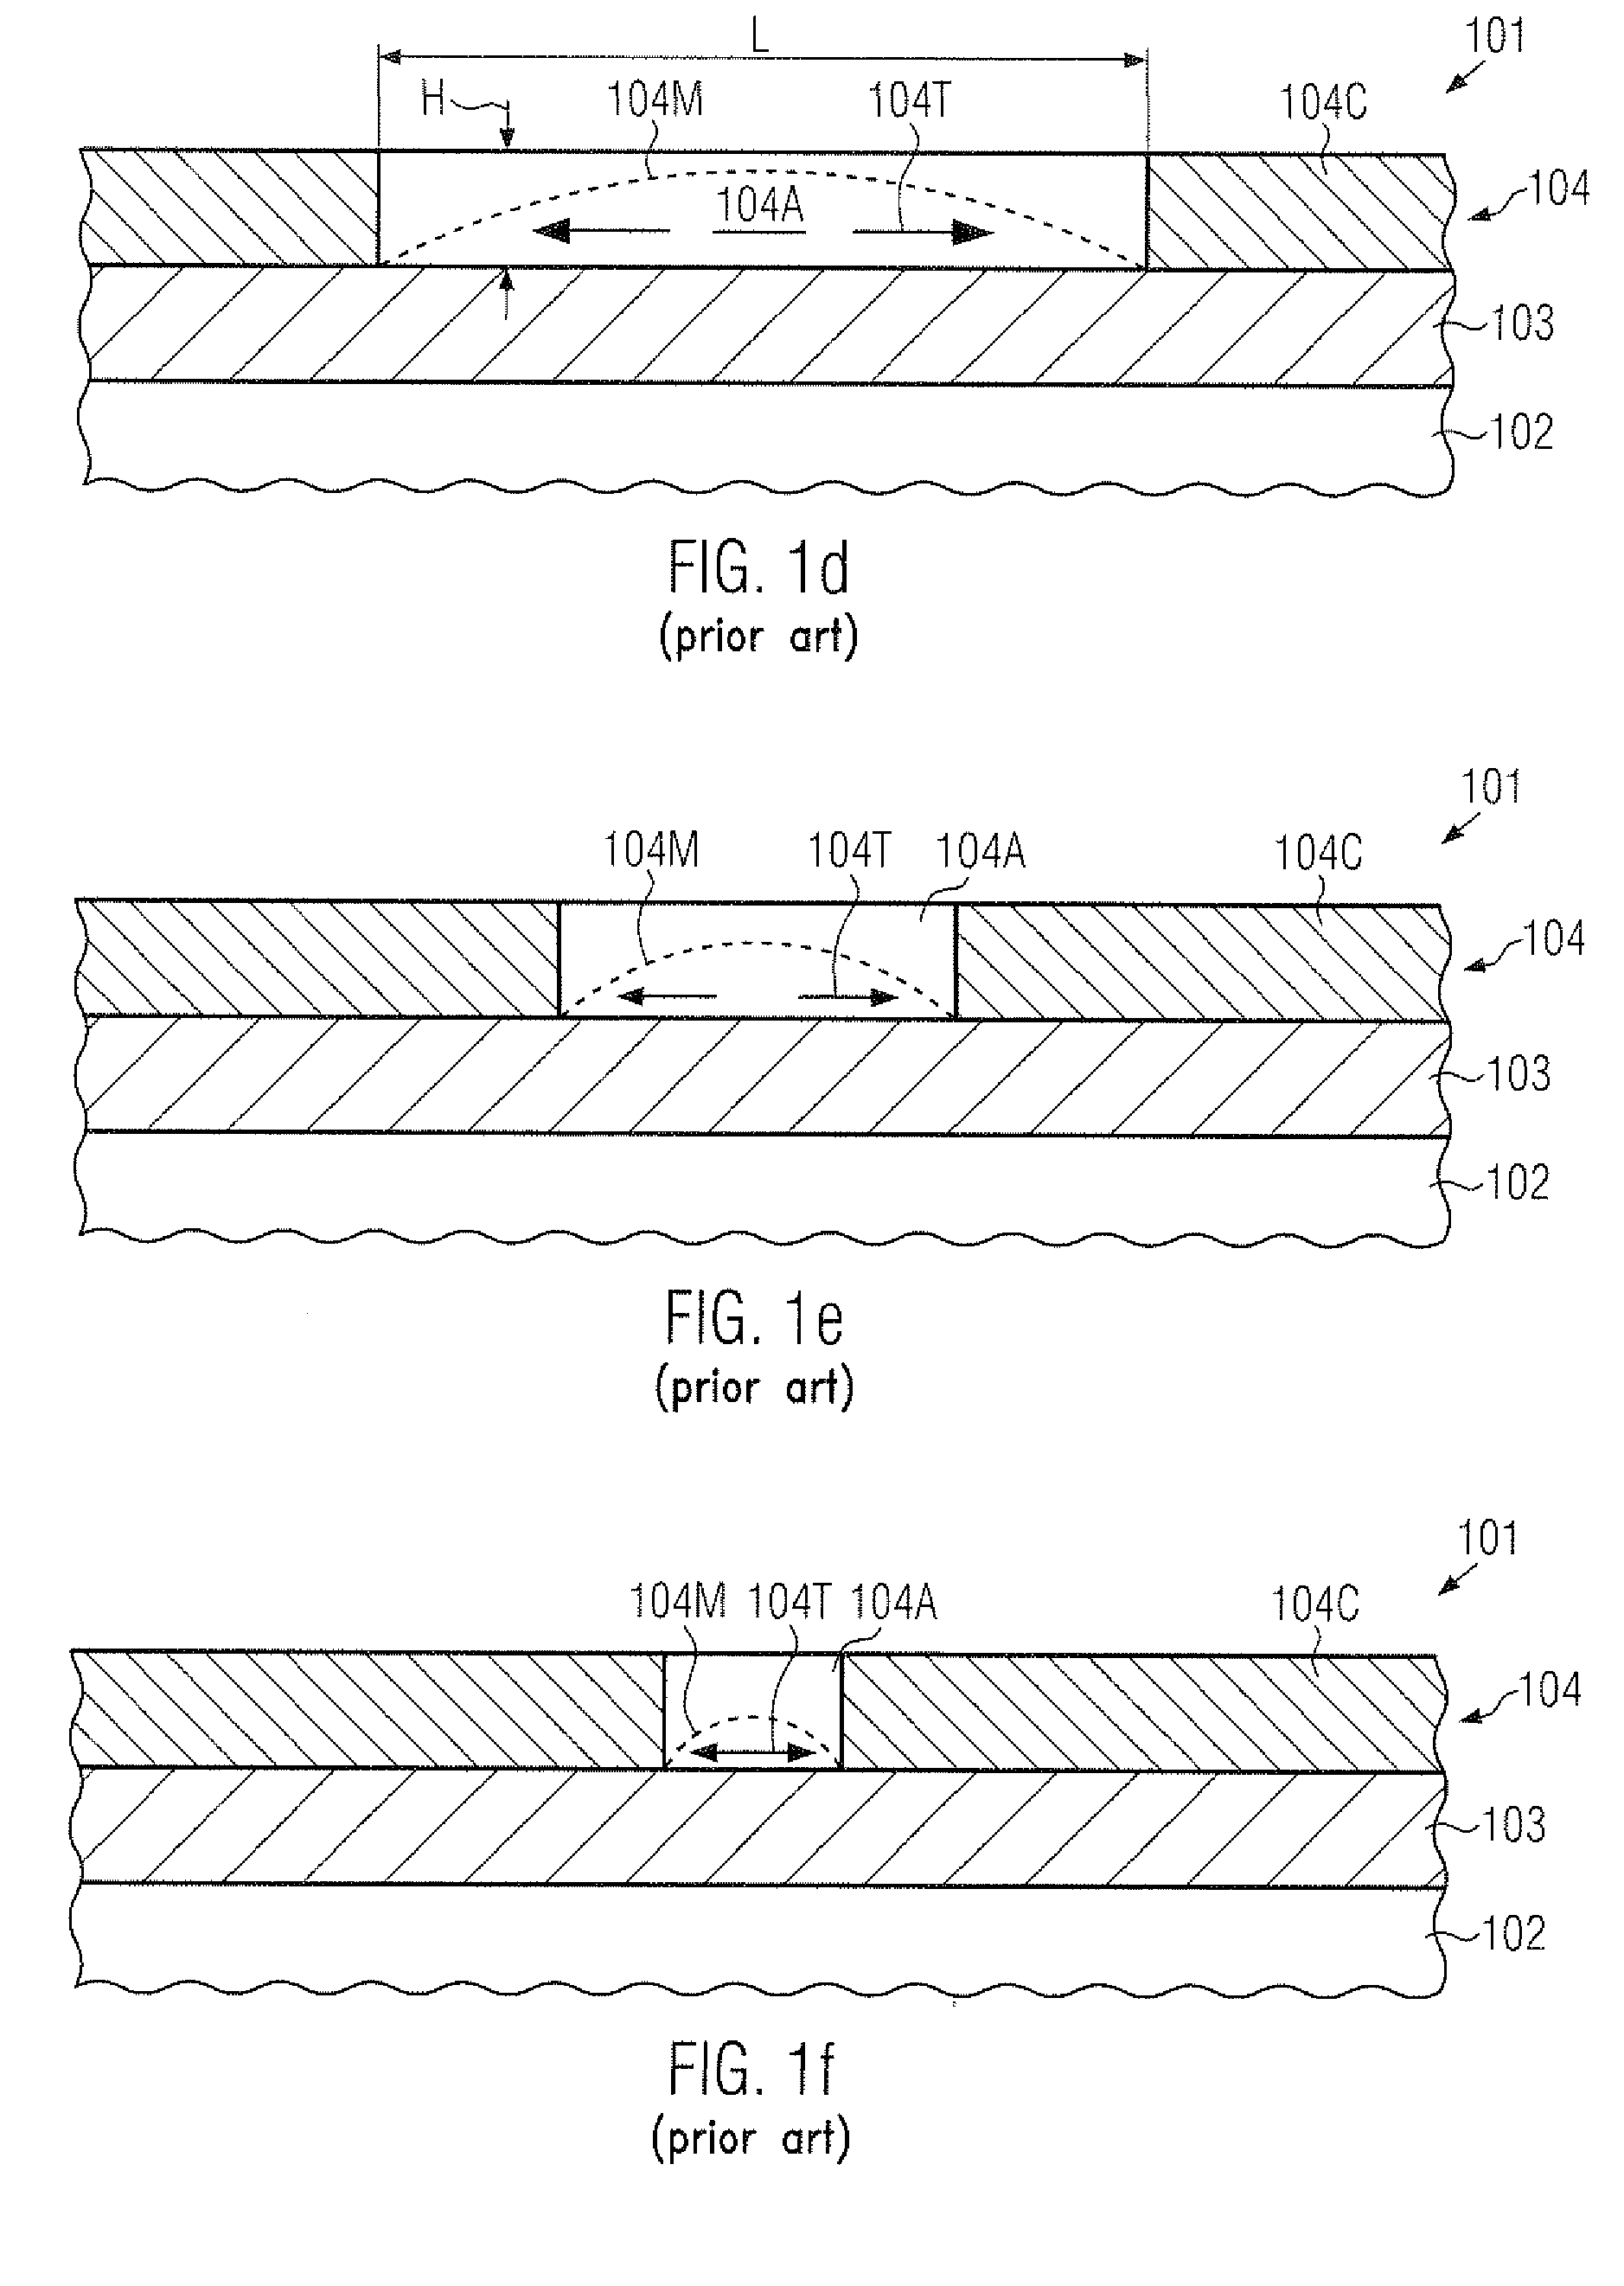 Strain memorization in strained soi substrates of semiconductor devices